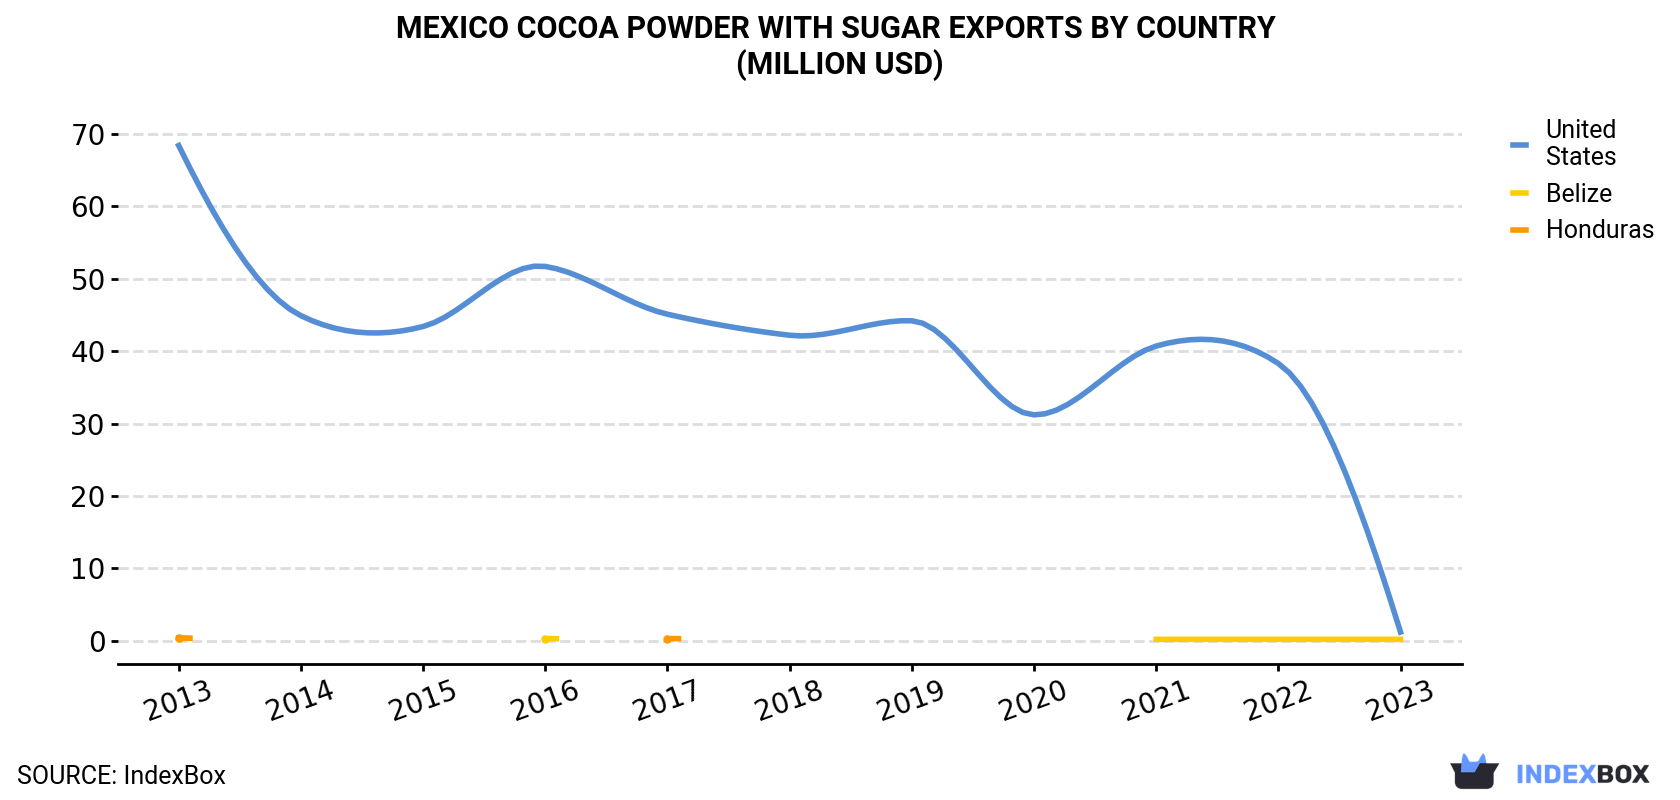 Mexico Cocoa Powder With Sugar Exports By Country (Million USD)